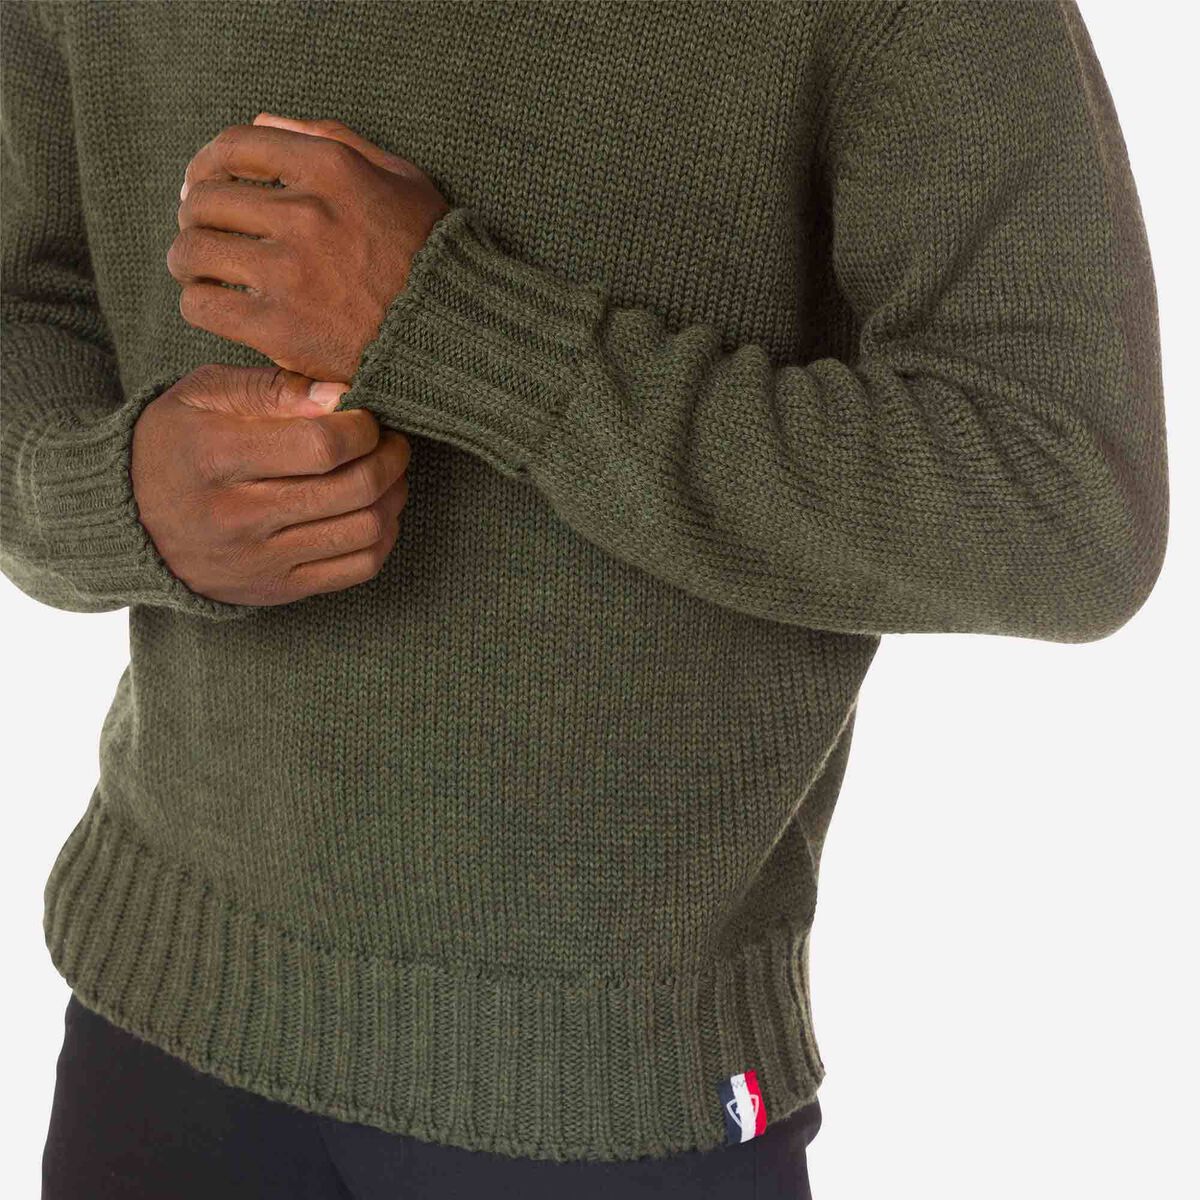 Men's Over Round-Neck Knit Sweater